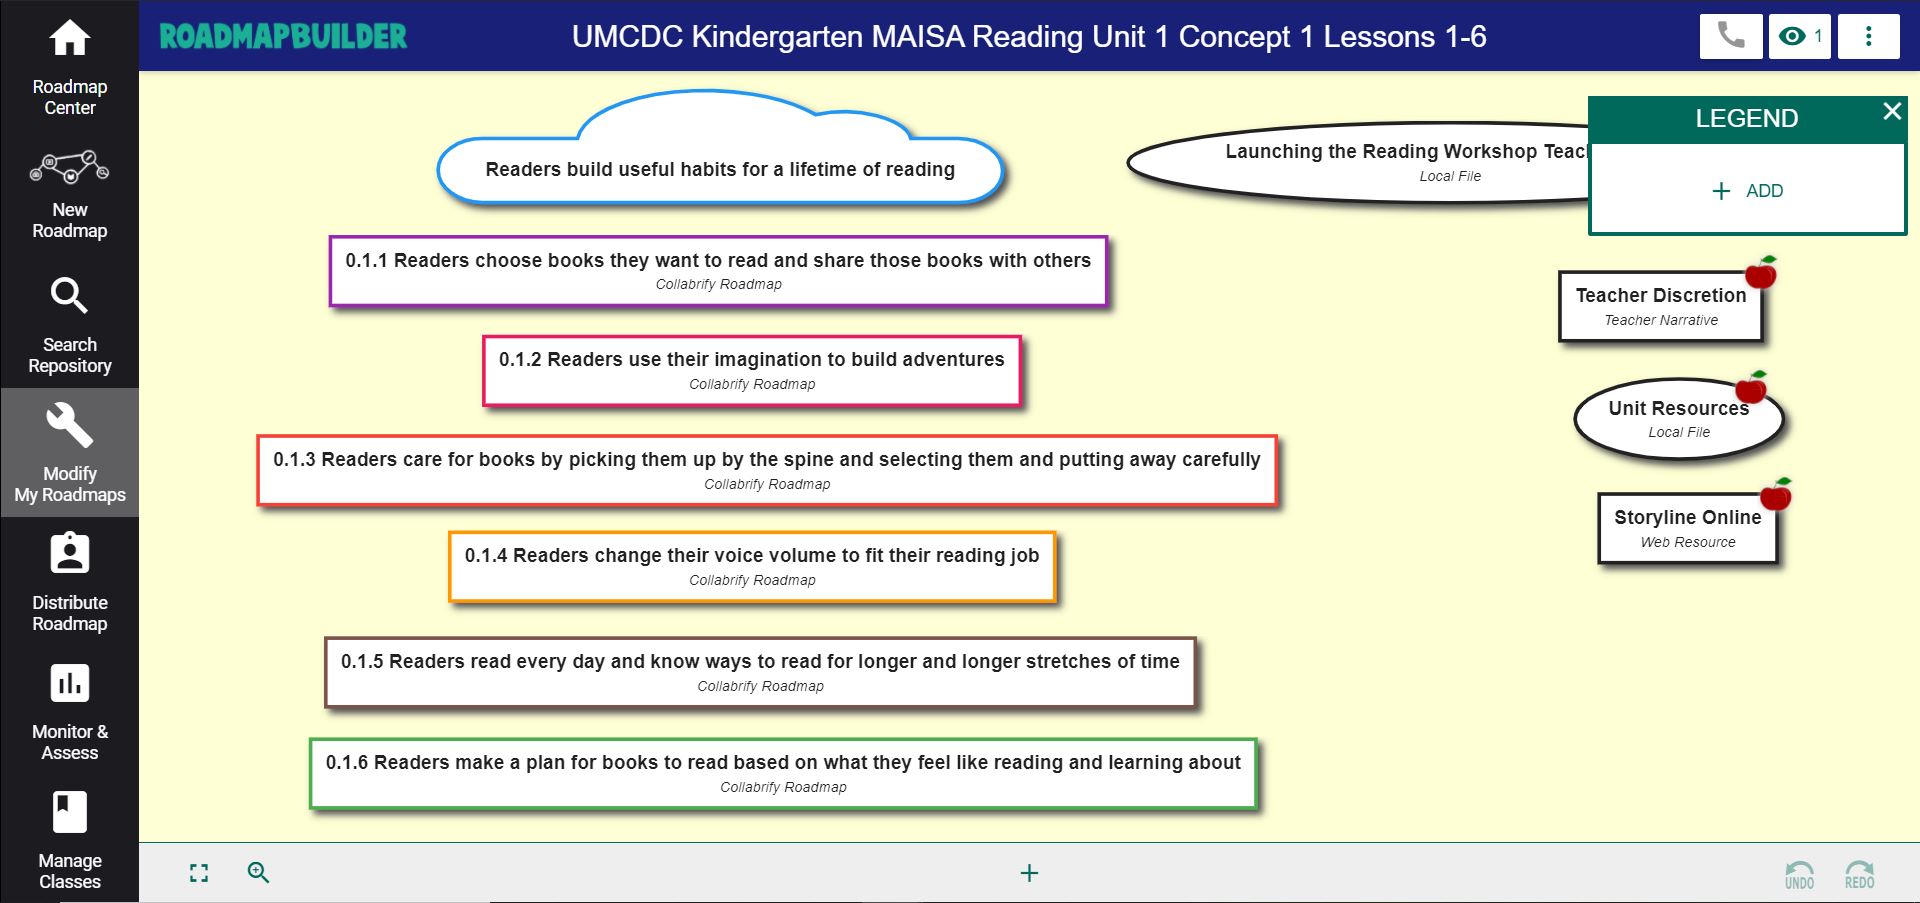 Image with rectangles and circles mapping the learning journey for a student in kindergarden